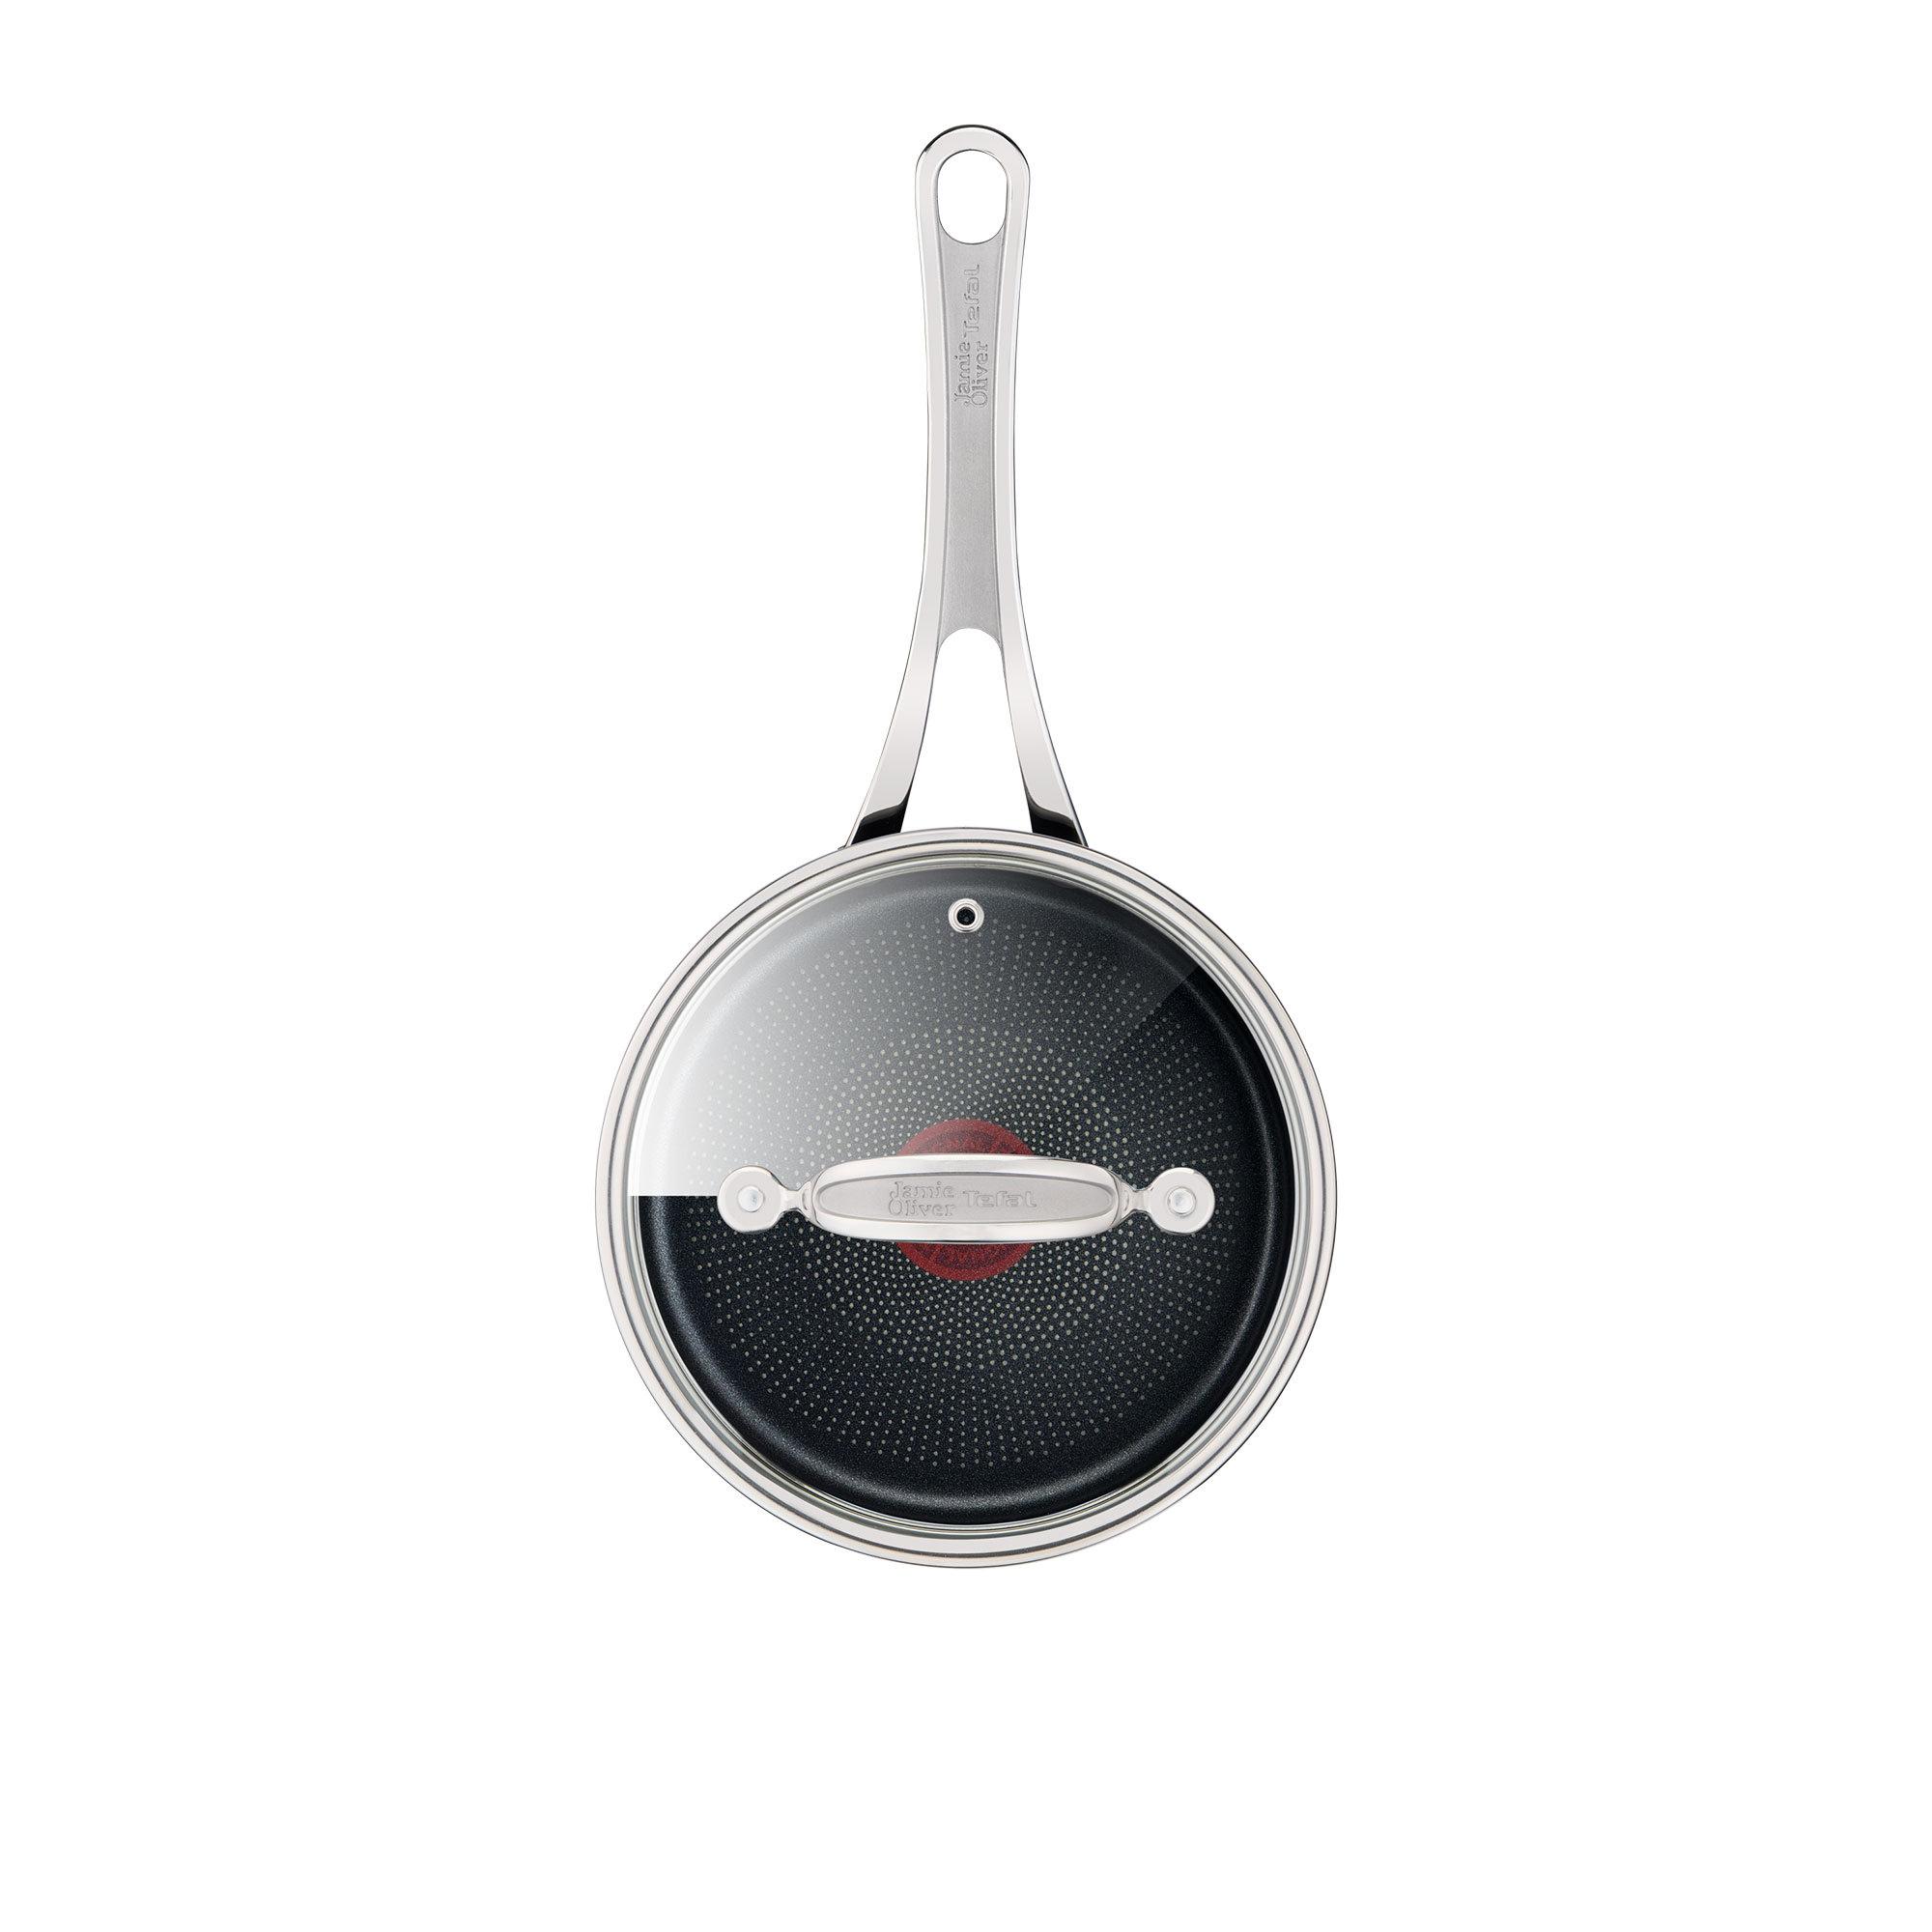 Jamie Oliver by Tefal Cook's Classic Non Stick Induction Saucepan 18cm - 2.2L Image 4